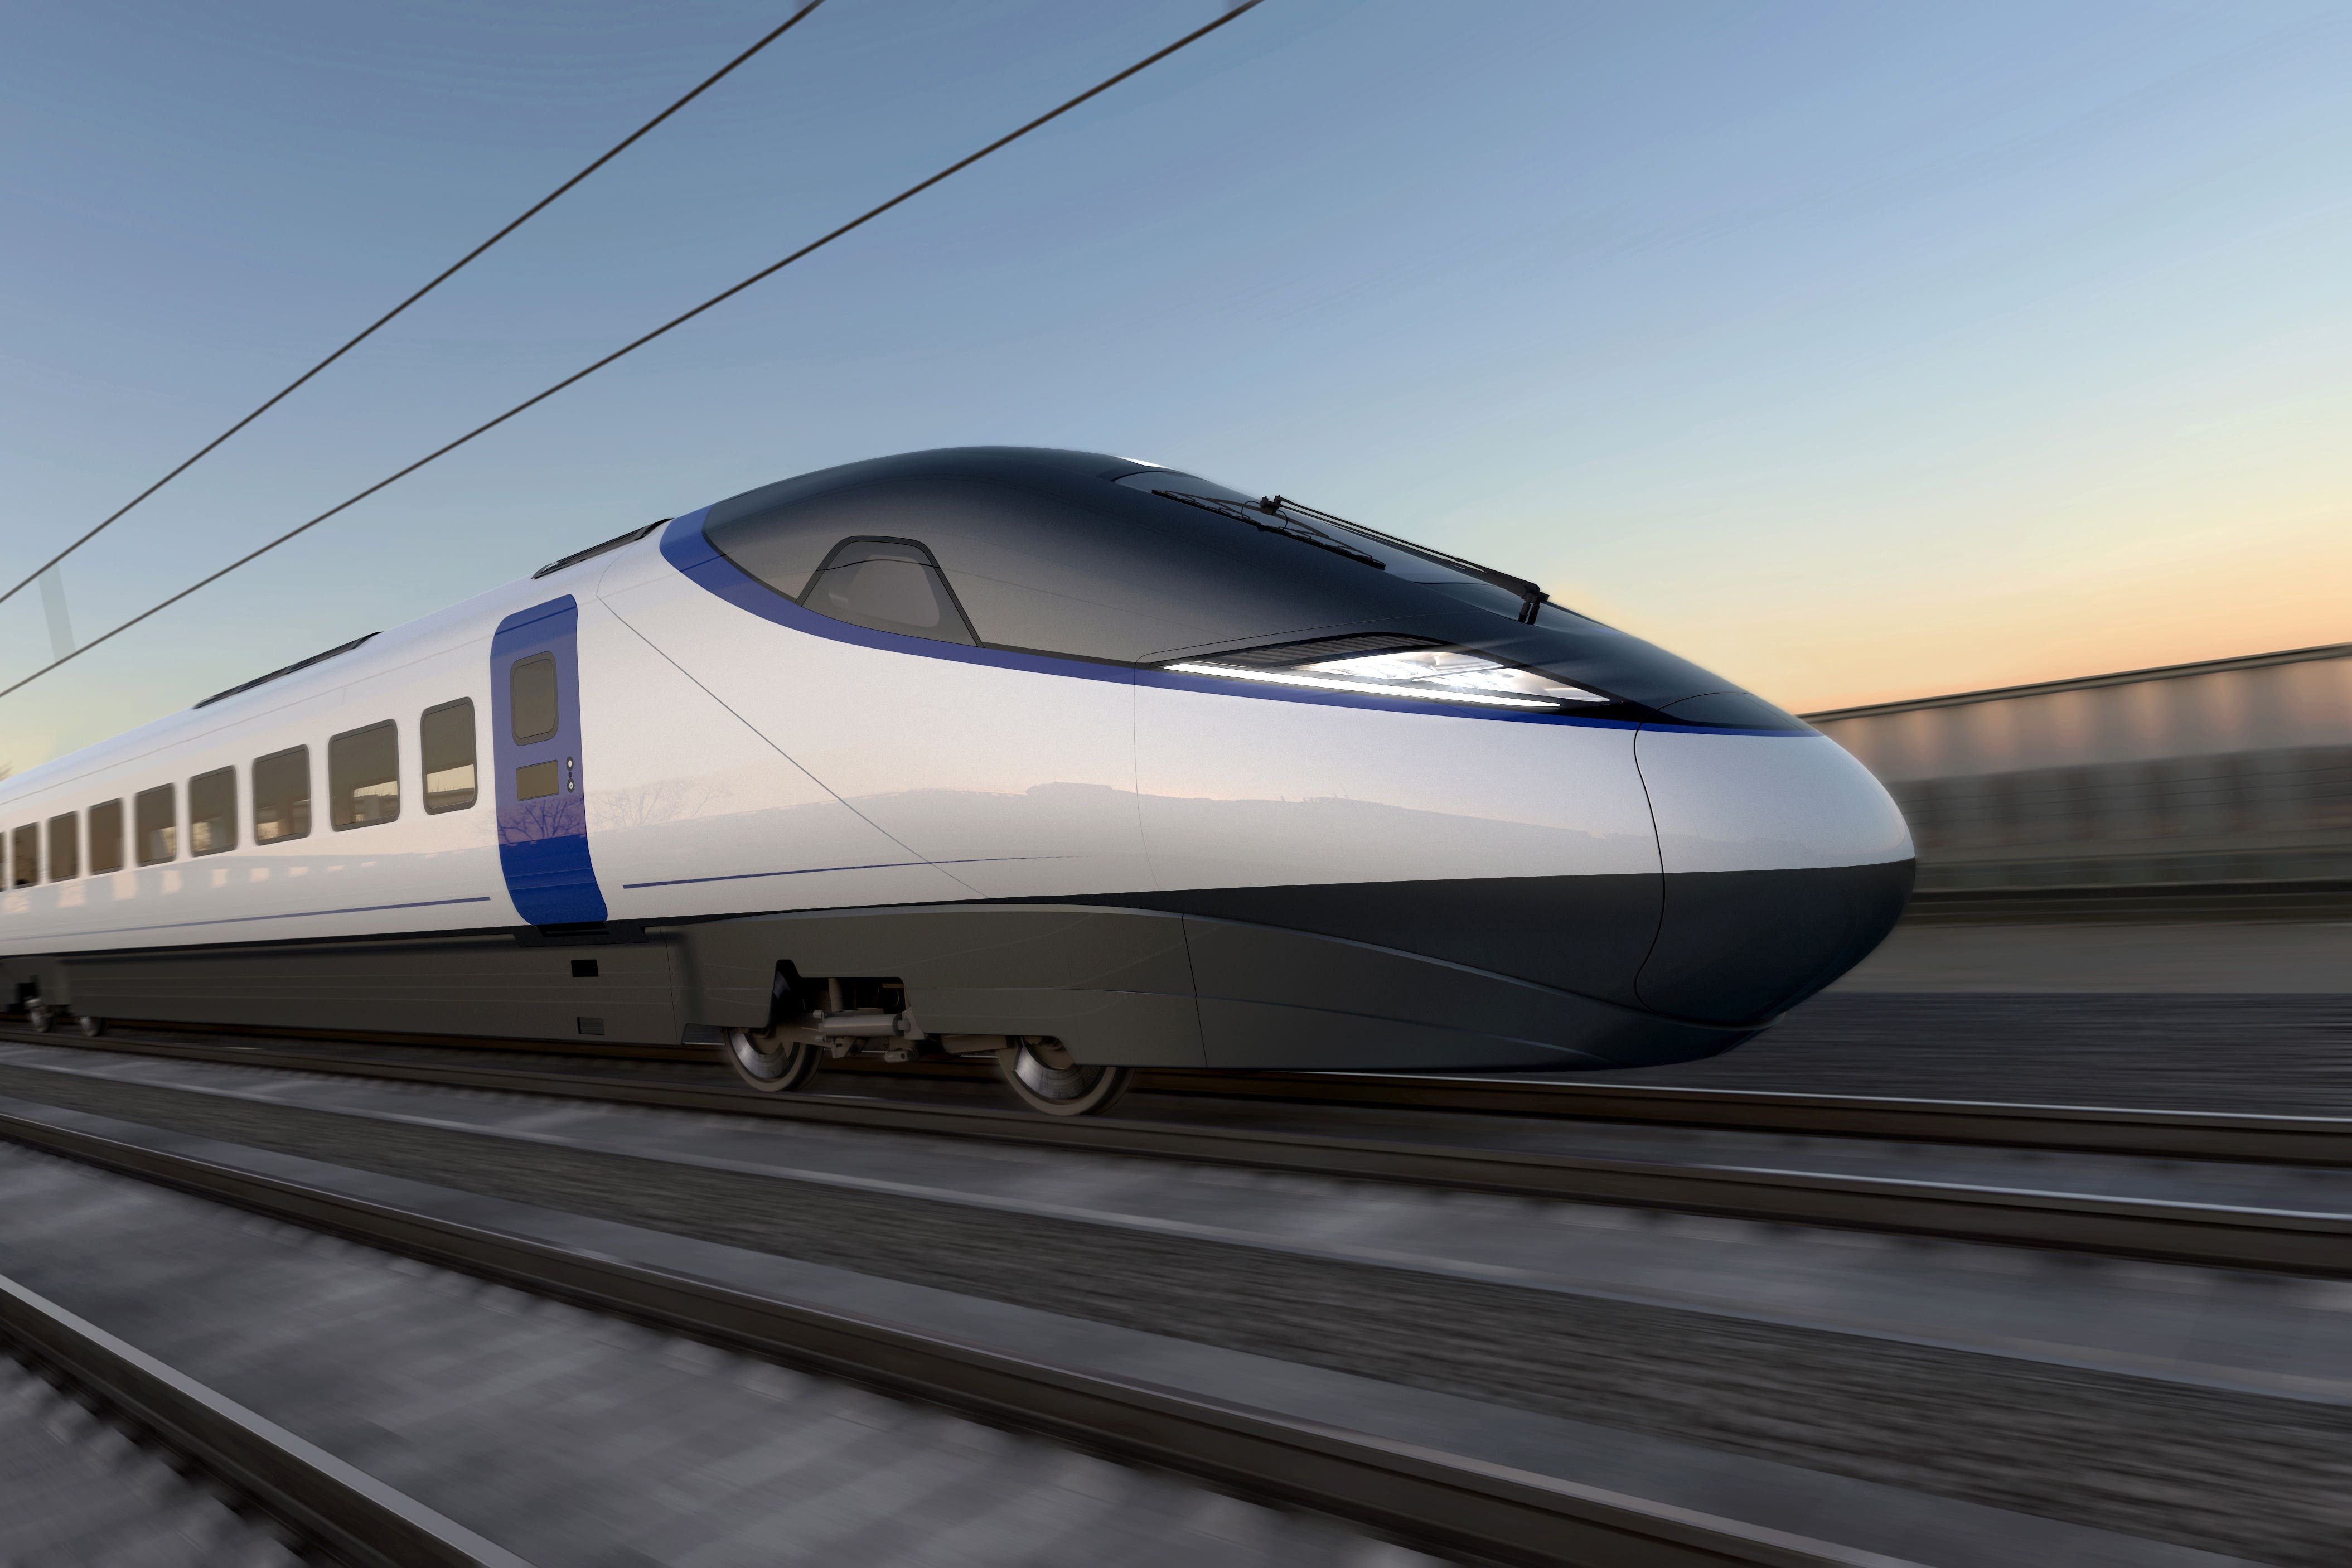 The prime minister axed plans for the HS2 high-speed rail link to run from Birmingham to Manchester amid soaring costs